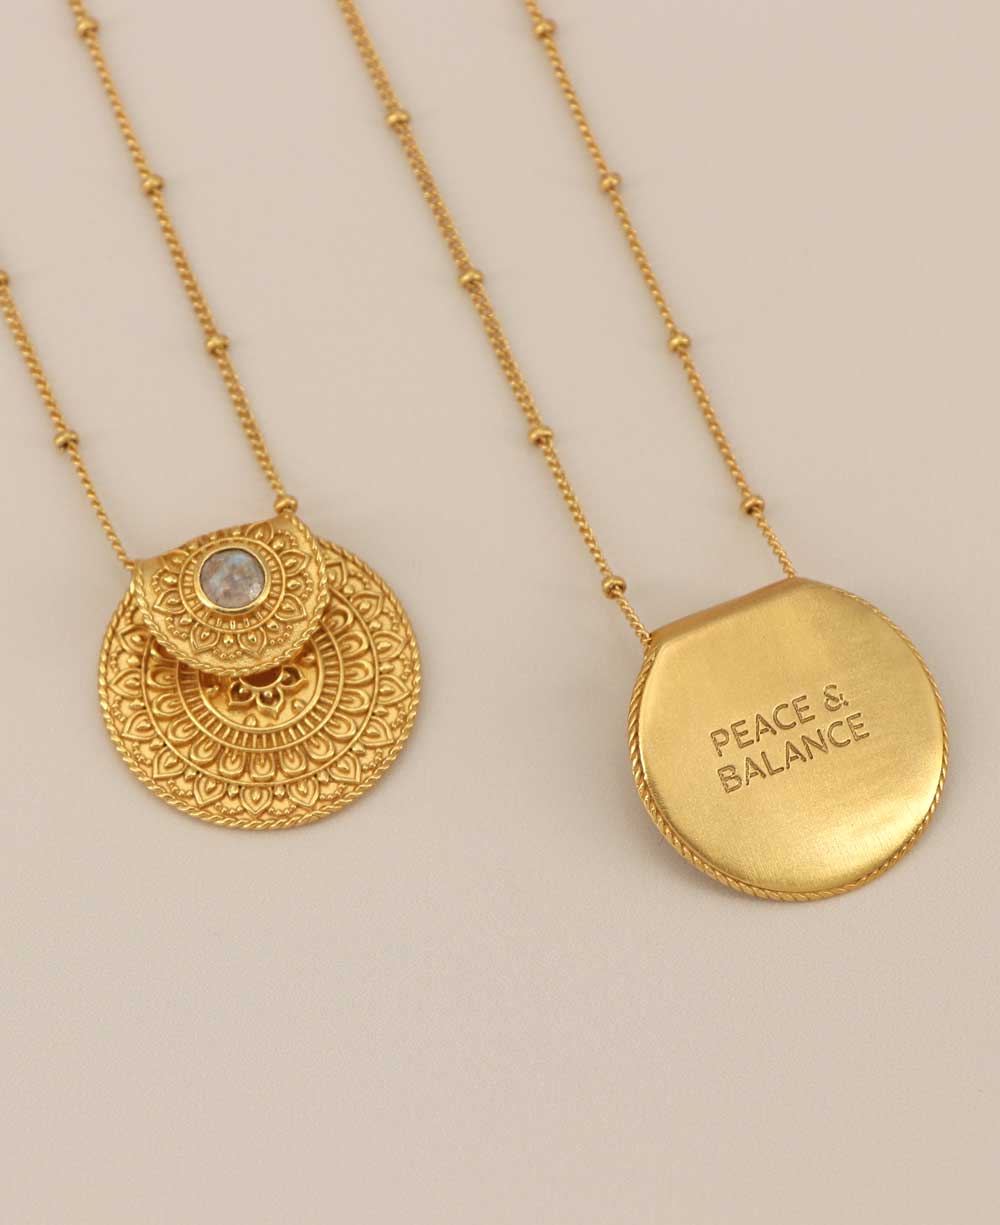 Inspirational Gold Plated Mandala Necklace with Rainbow Moonstone - Necklaces